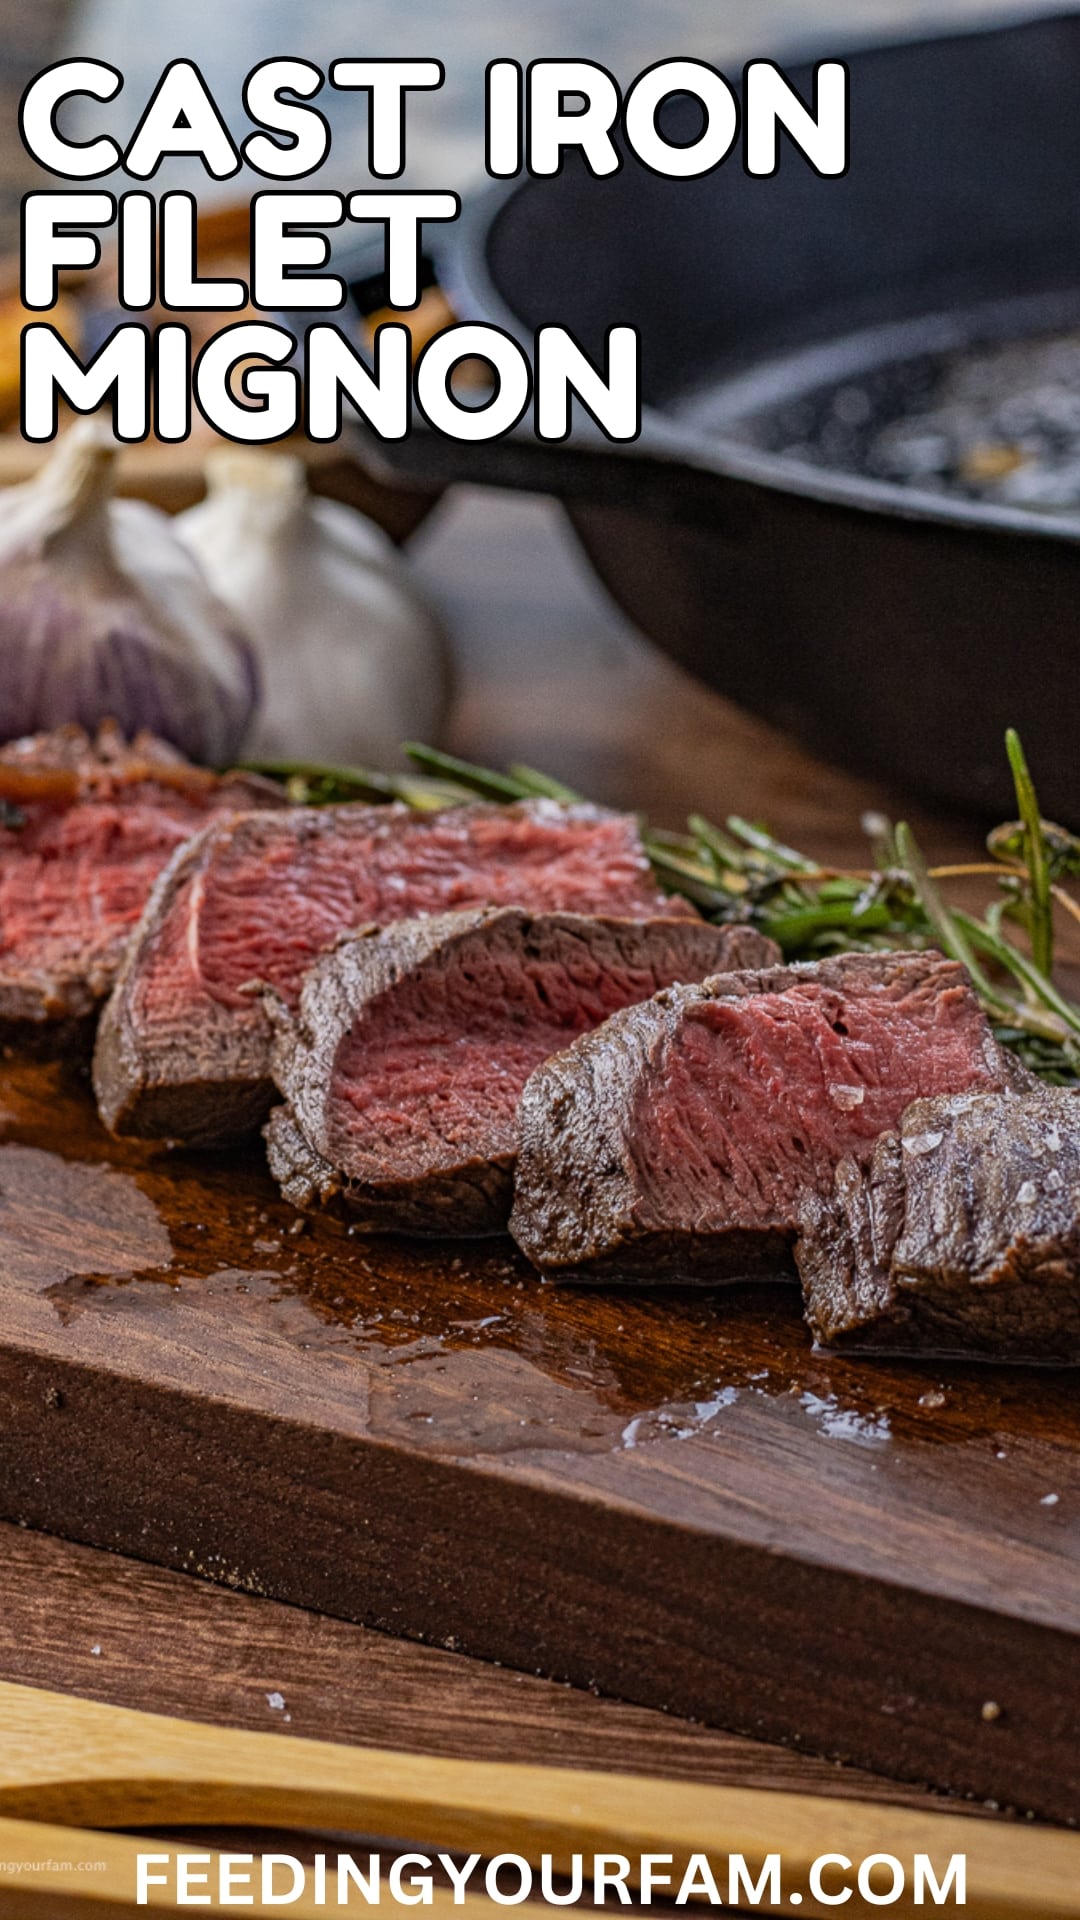 Tender filet mignon is seasoned with simple spices and cooked to perfection in a cast iron pan.